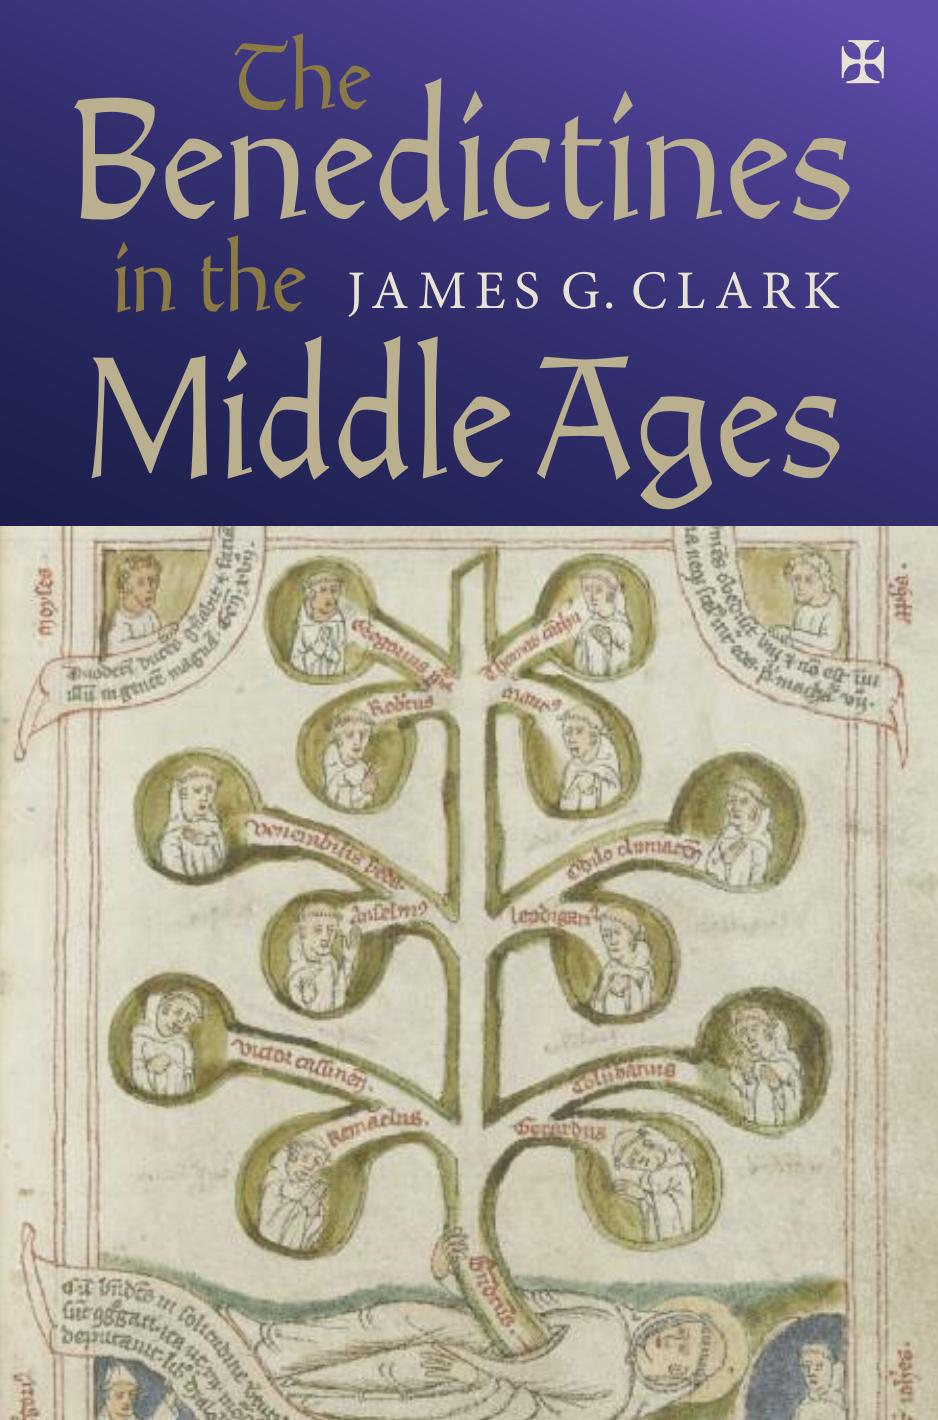 The Benedictines in the Middle Ages by Clark James G.;